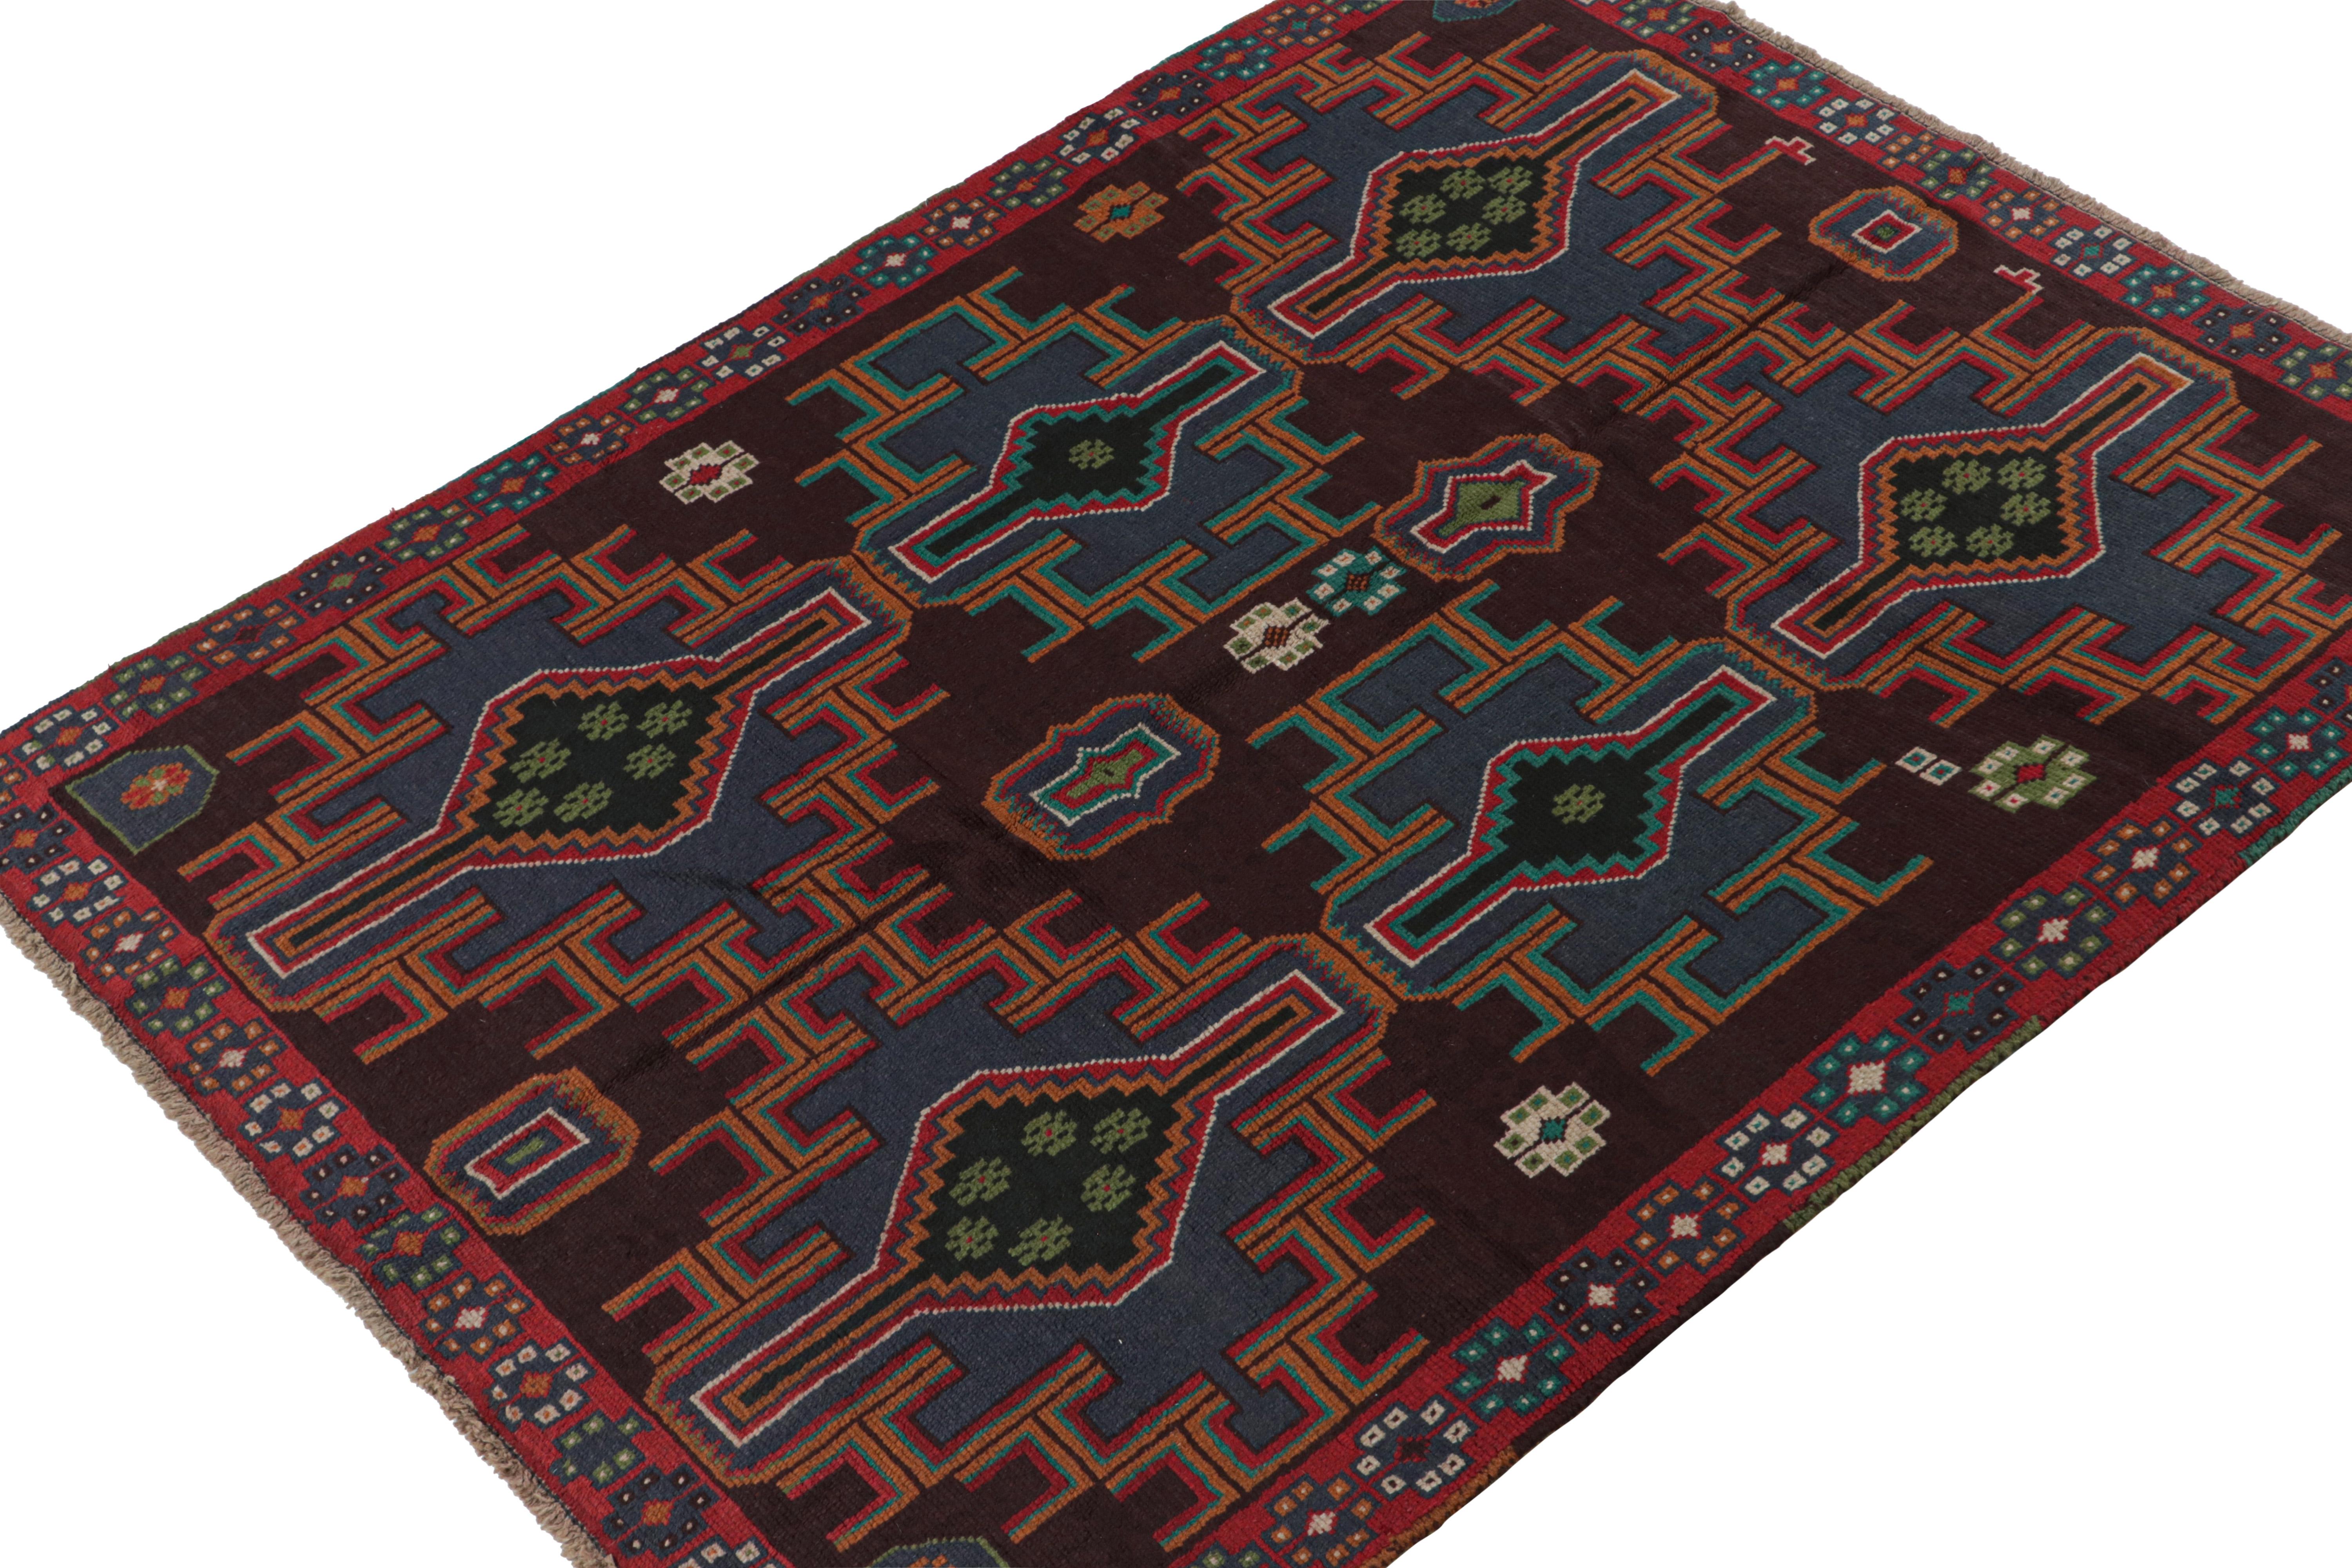 Hand knotted in wool, this 6x8 Baluch rug represents a new line of tribal carpets in the Modern Classics Collection by Rug & Kilim. Each piece  represents the work of women weavers in Afghanistan, preserving the rich tradition of their centuries-old